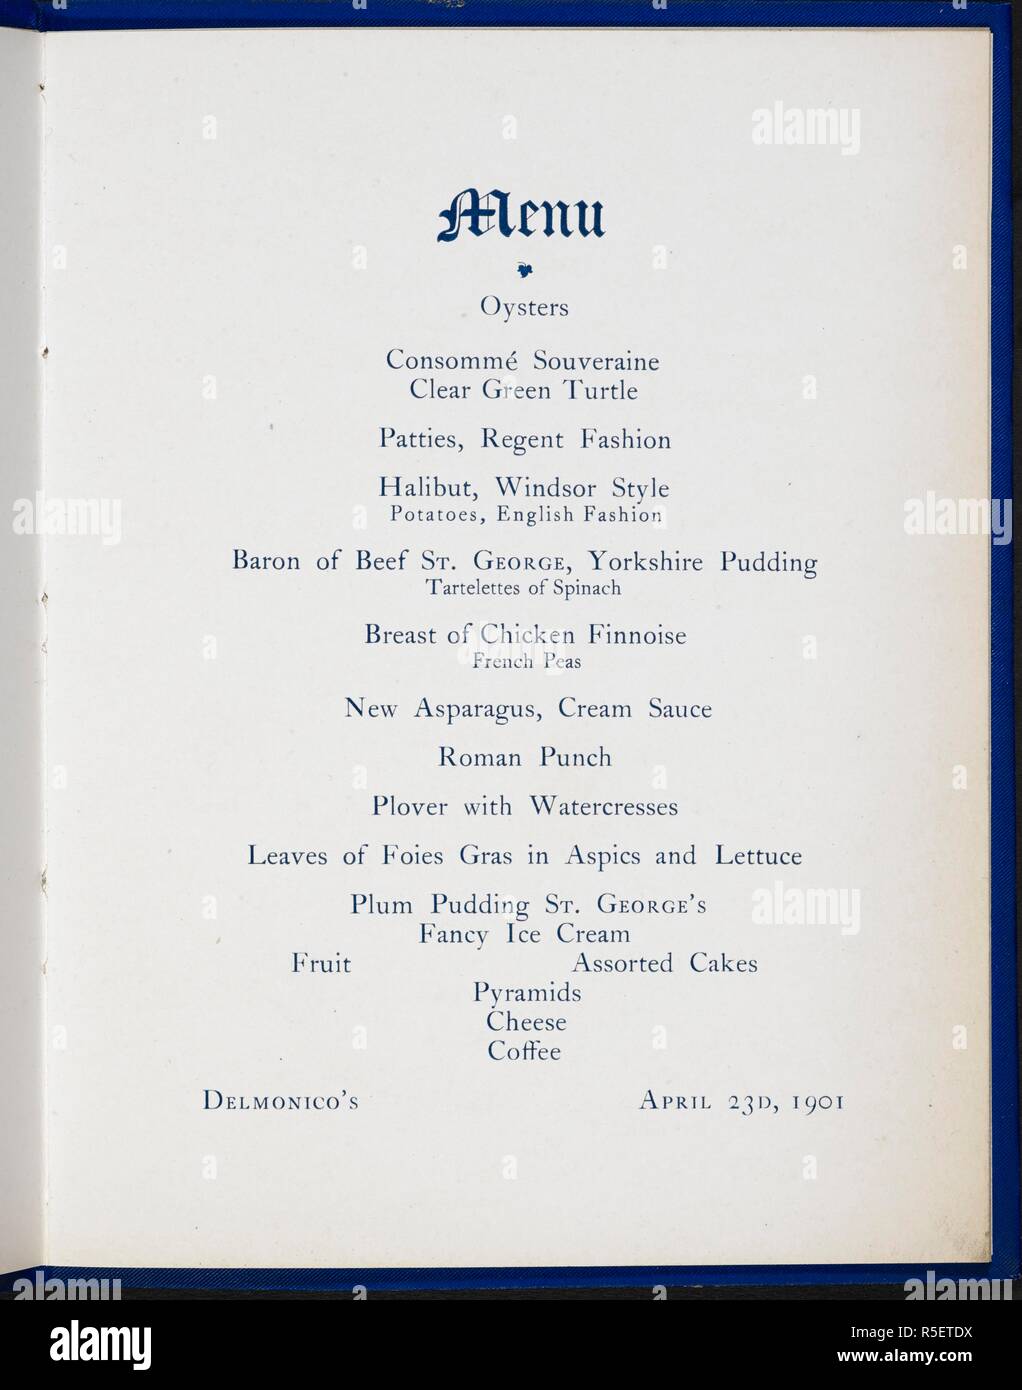 Menu for an event held by the St.George's society of New York at Delmonico's, April 23rd, 1901. A collection of menu cards of dinners and reports of celebrations in the United States of America in the years 1890-1904, formed by Miss F. E. Buttolph. Bound in three volumes. 1890-1904. See also file B20086-48. Source: C.120.f.2 volume 1, no.4. Stock Photo